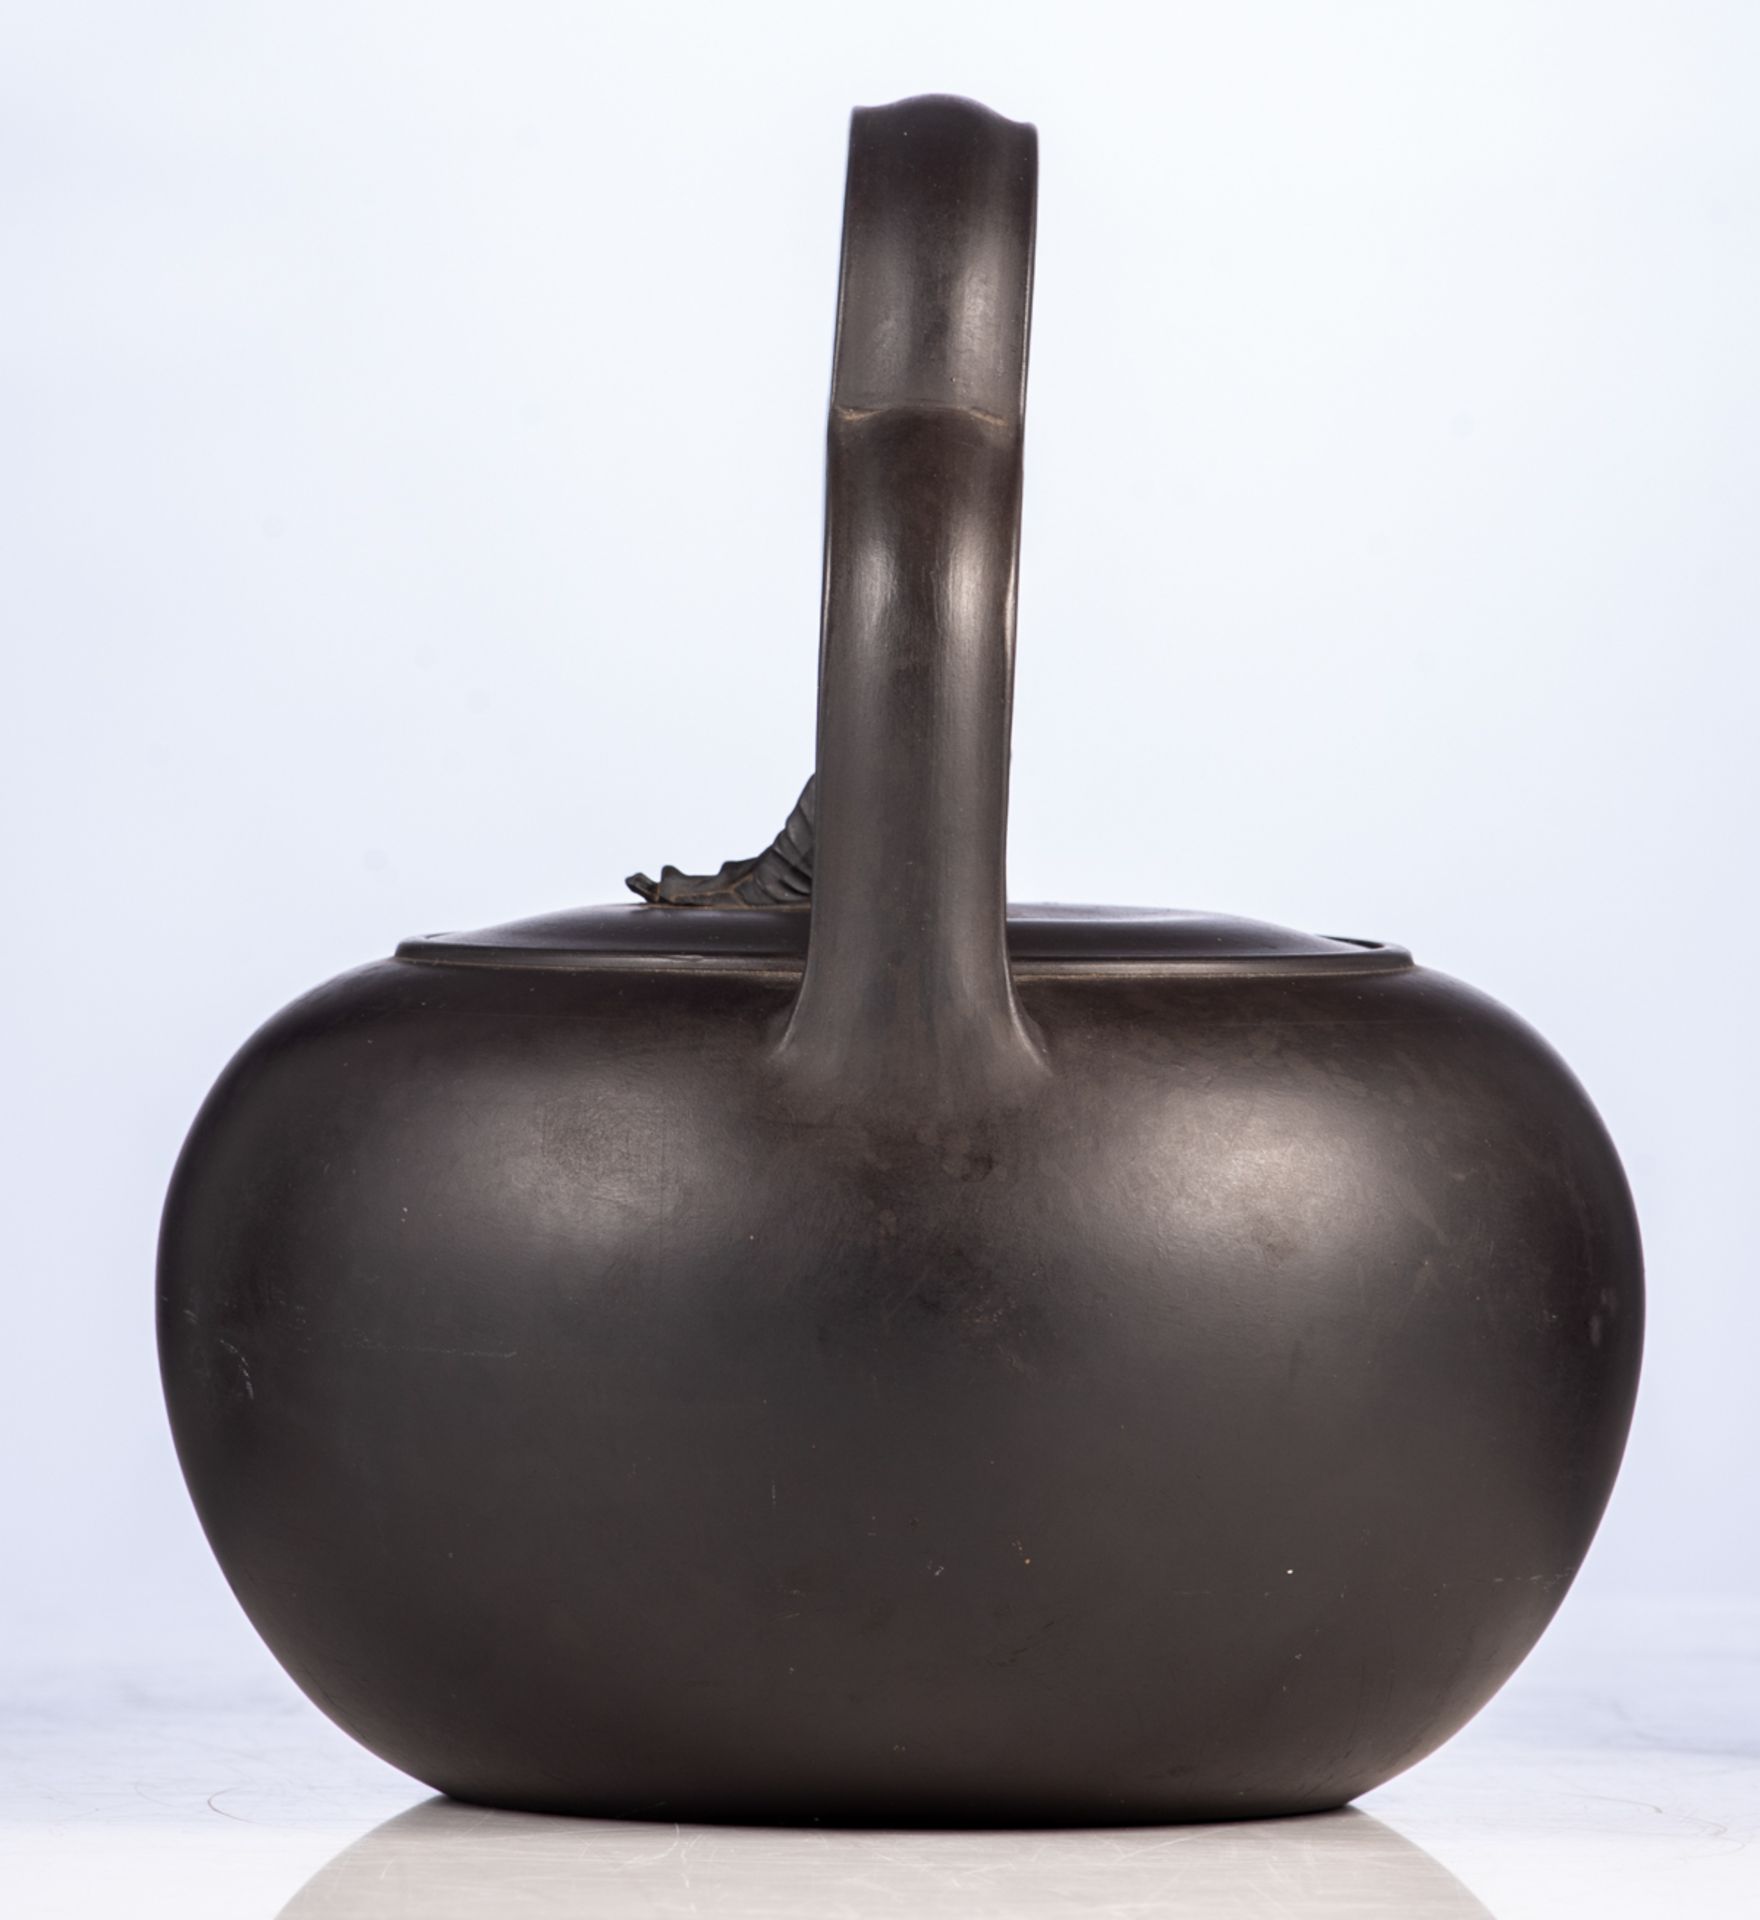 An English black basalt teakettle with a lobed bail handle, a Sybil knop and a silver cap on the - Image 3 of 8